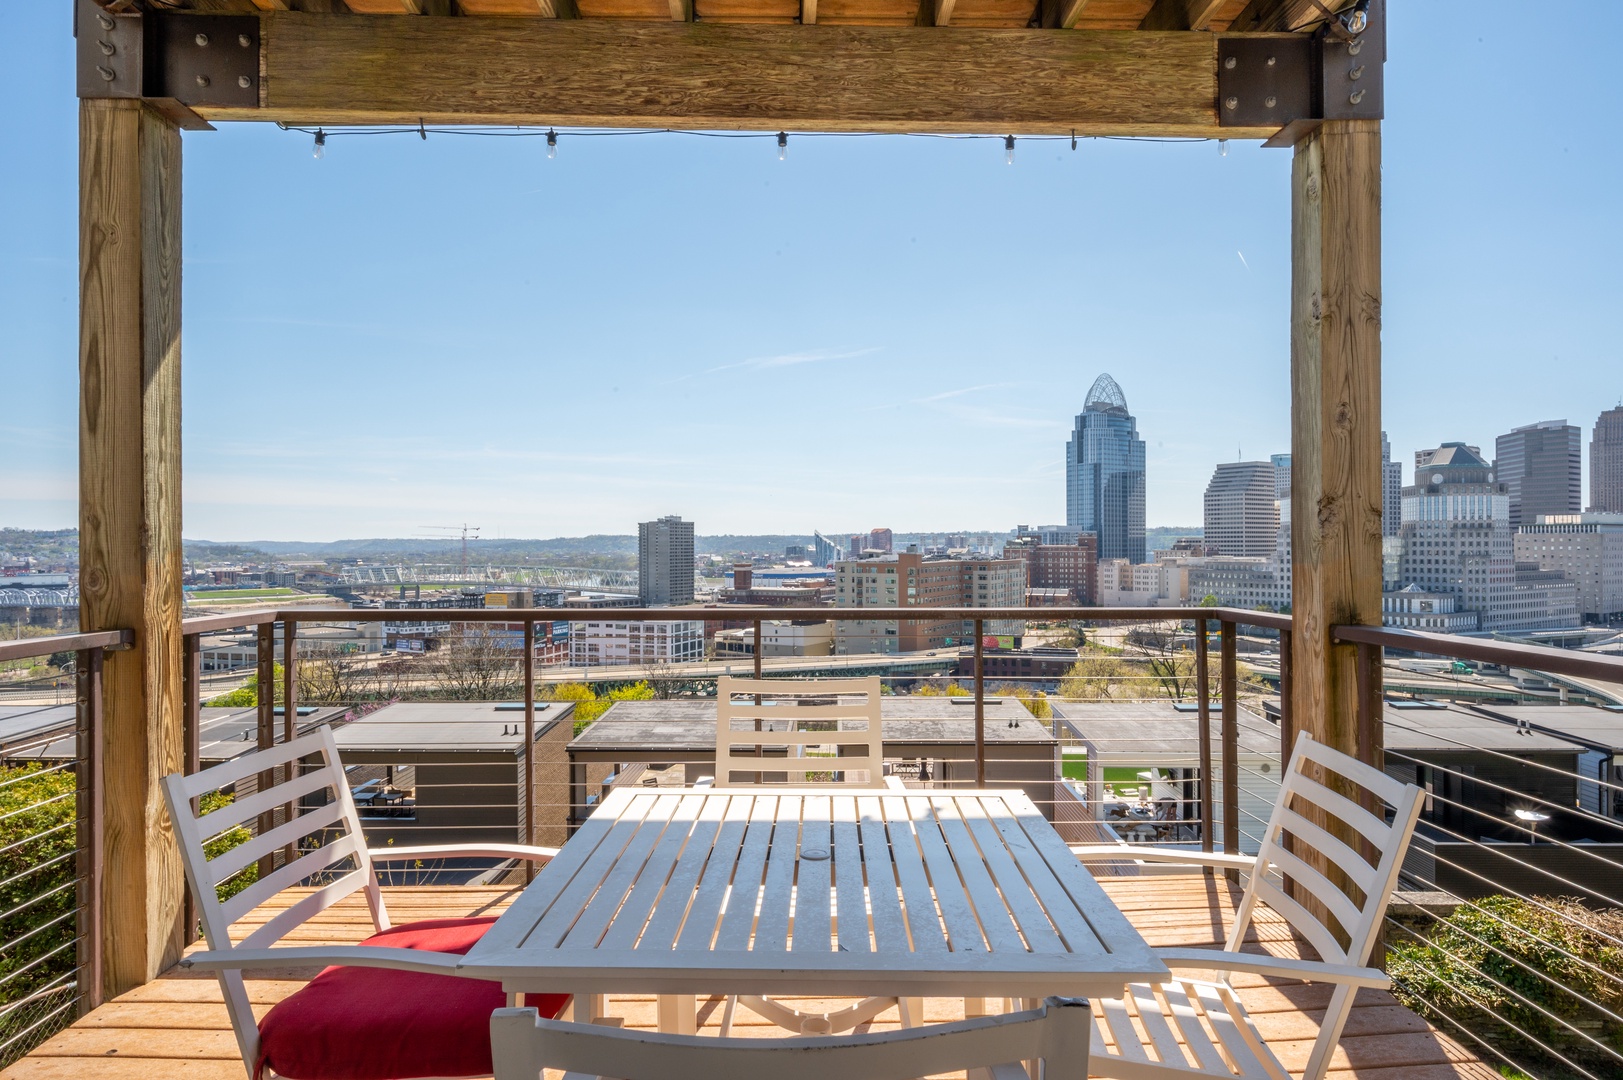 Incredible views will delight during your stay at Cincy Cozy Corner!